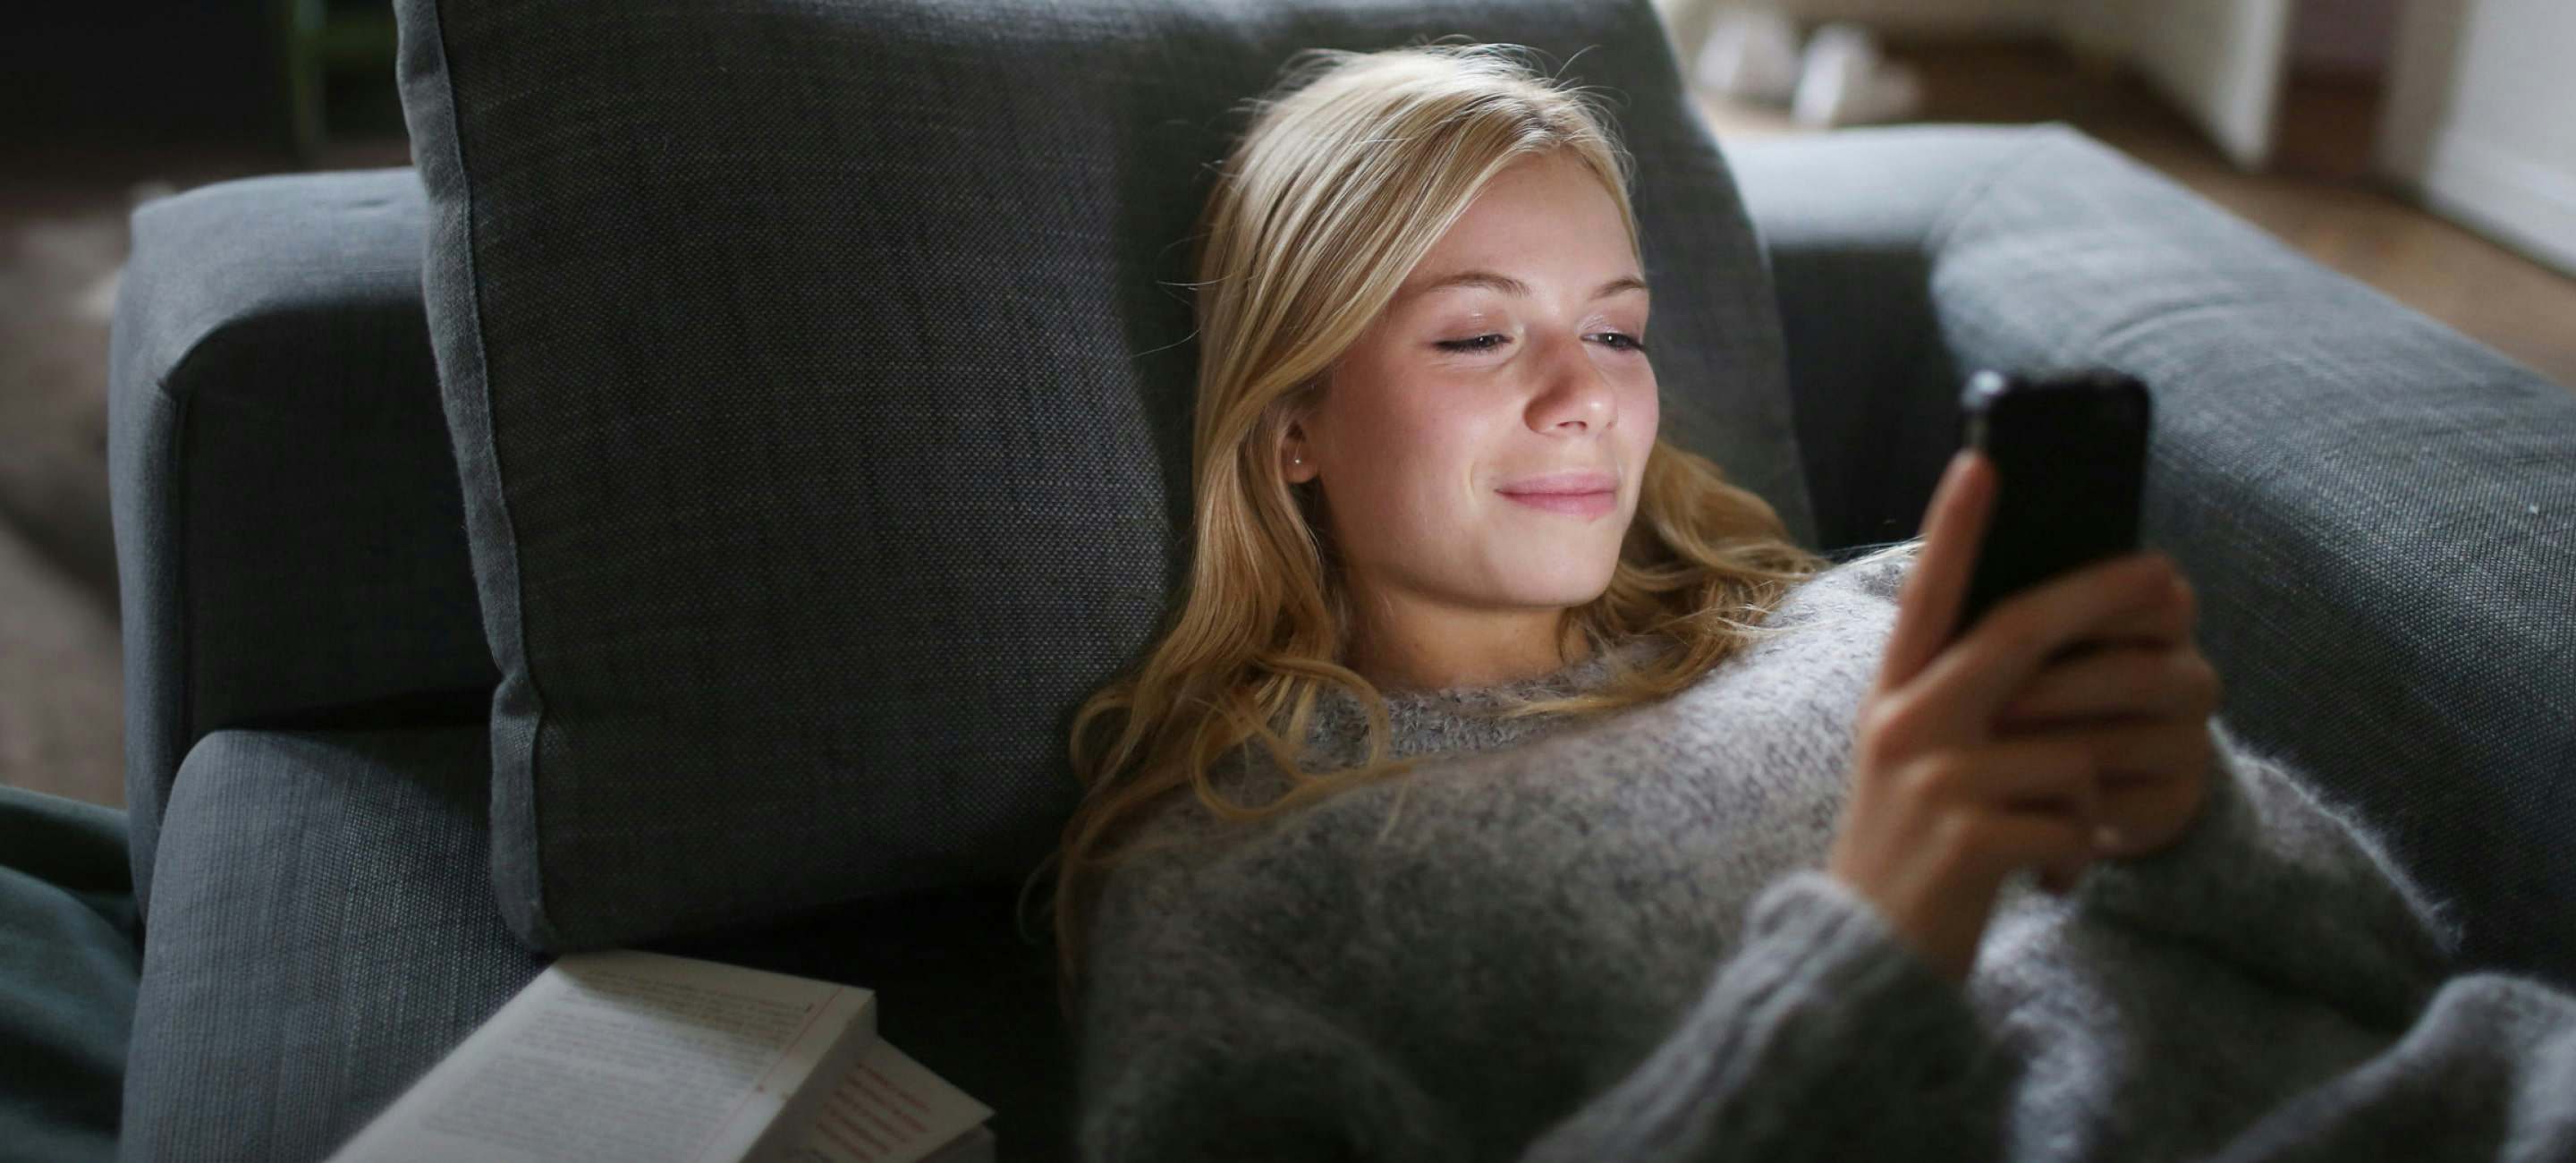 Woman on couch using phone